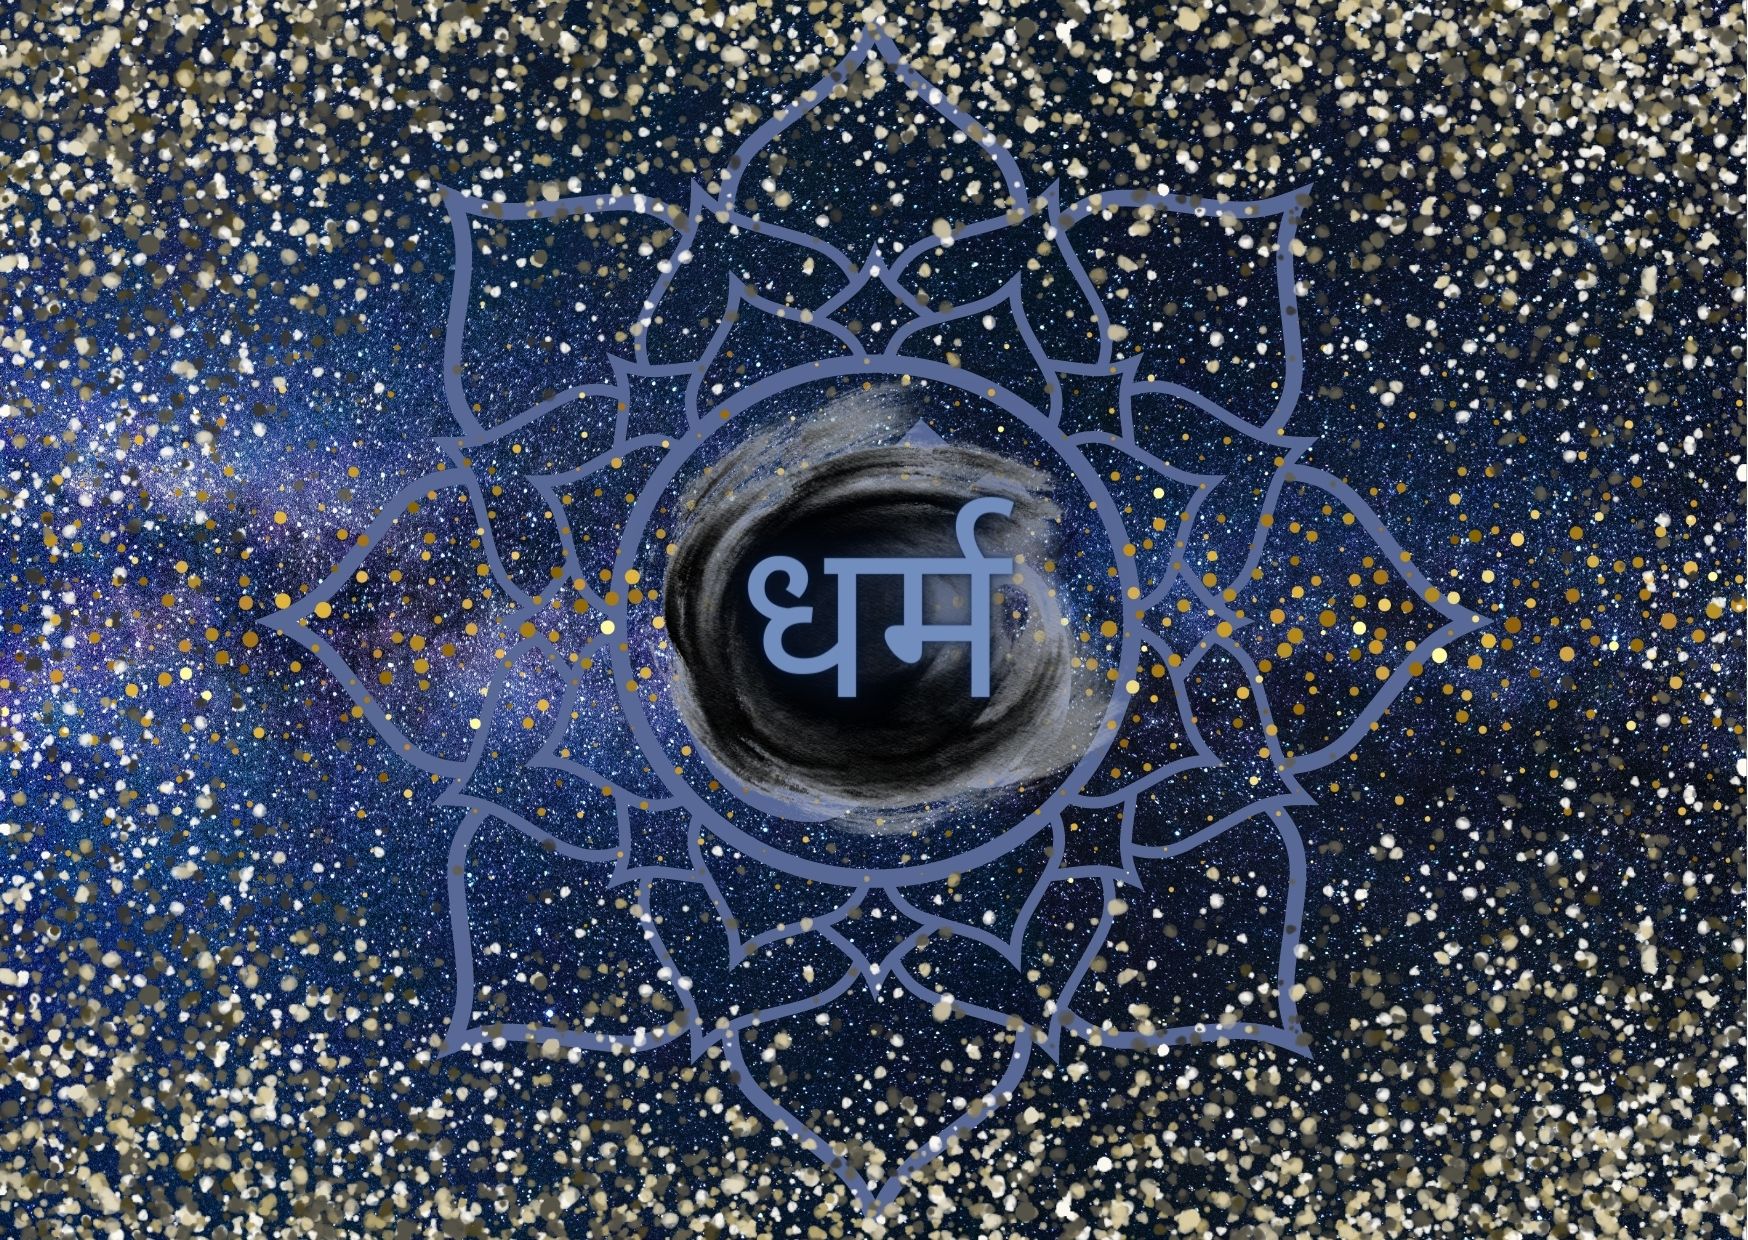 dharma written in Hindi between a mandala in the universe. (dharma means - doing the right thing to maintain balance in the world)